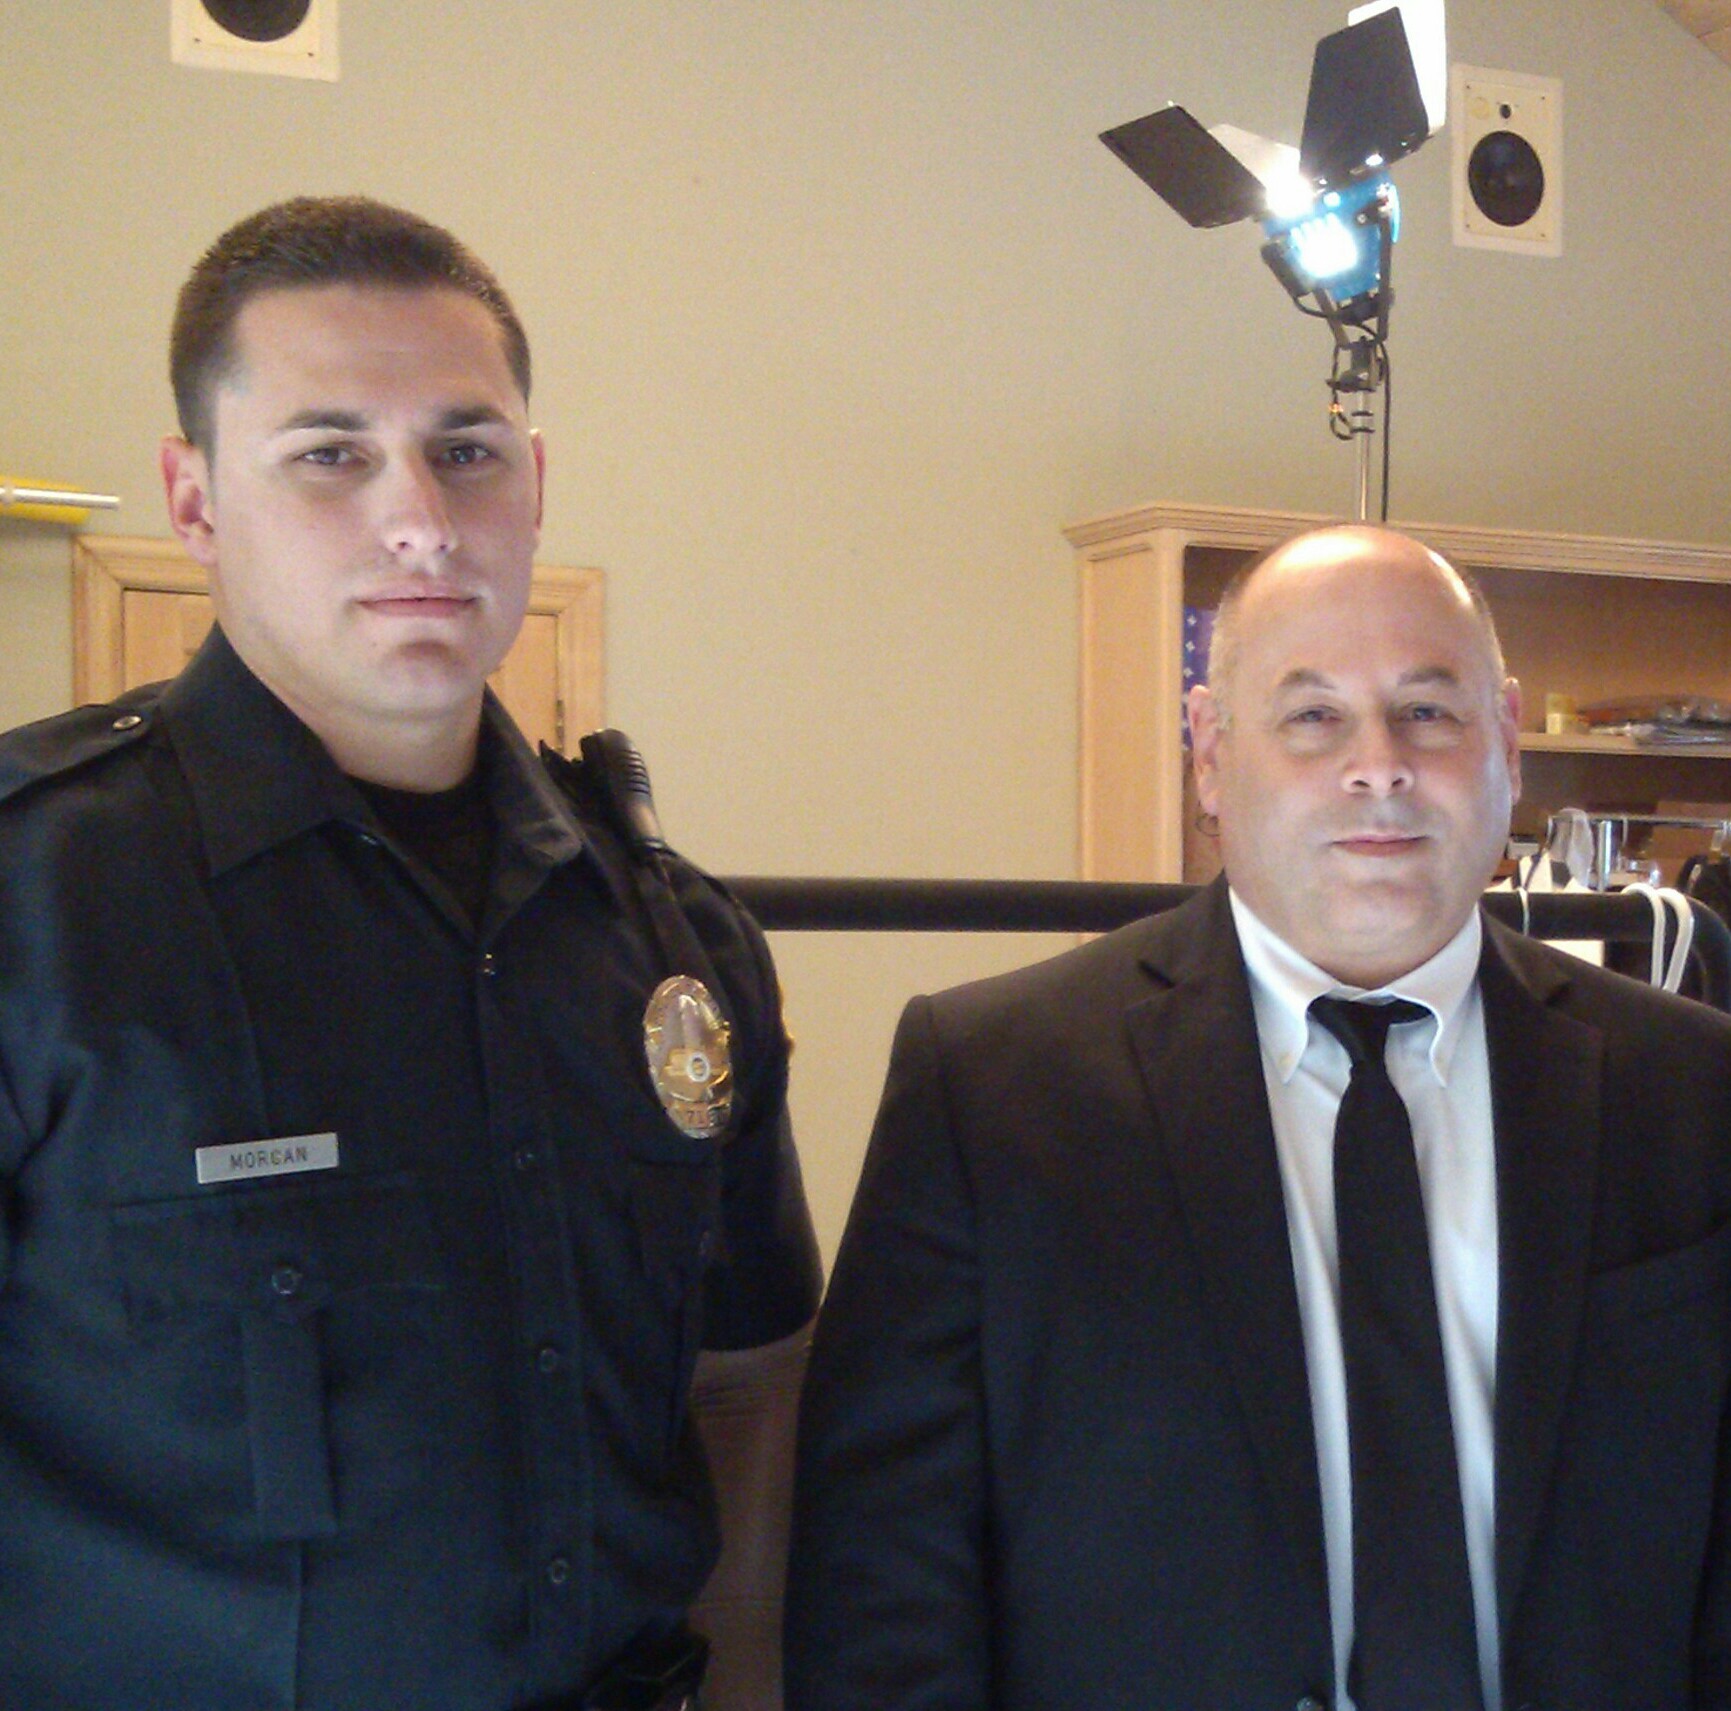 Dave Bean and real-life police officer prep for a scene on an upcoming tv show.